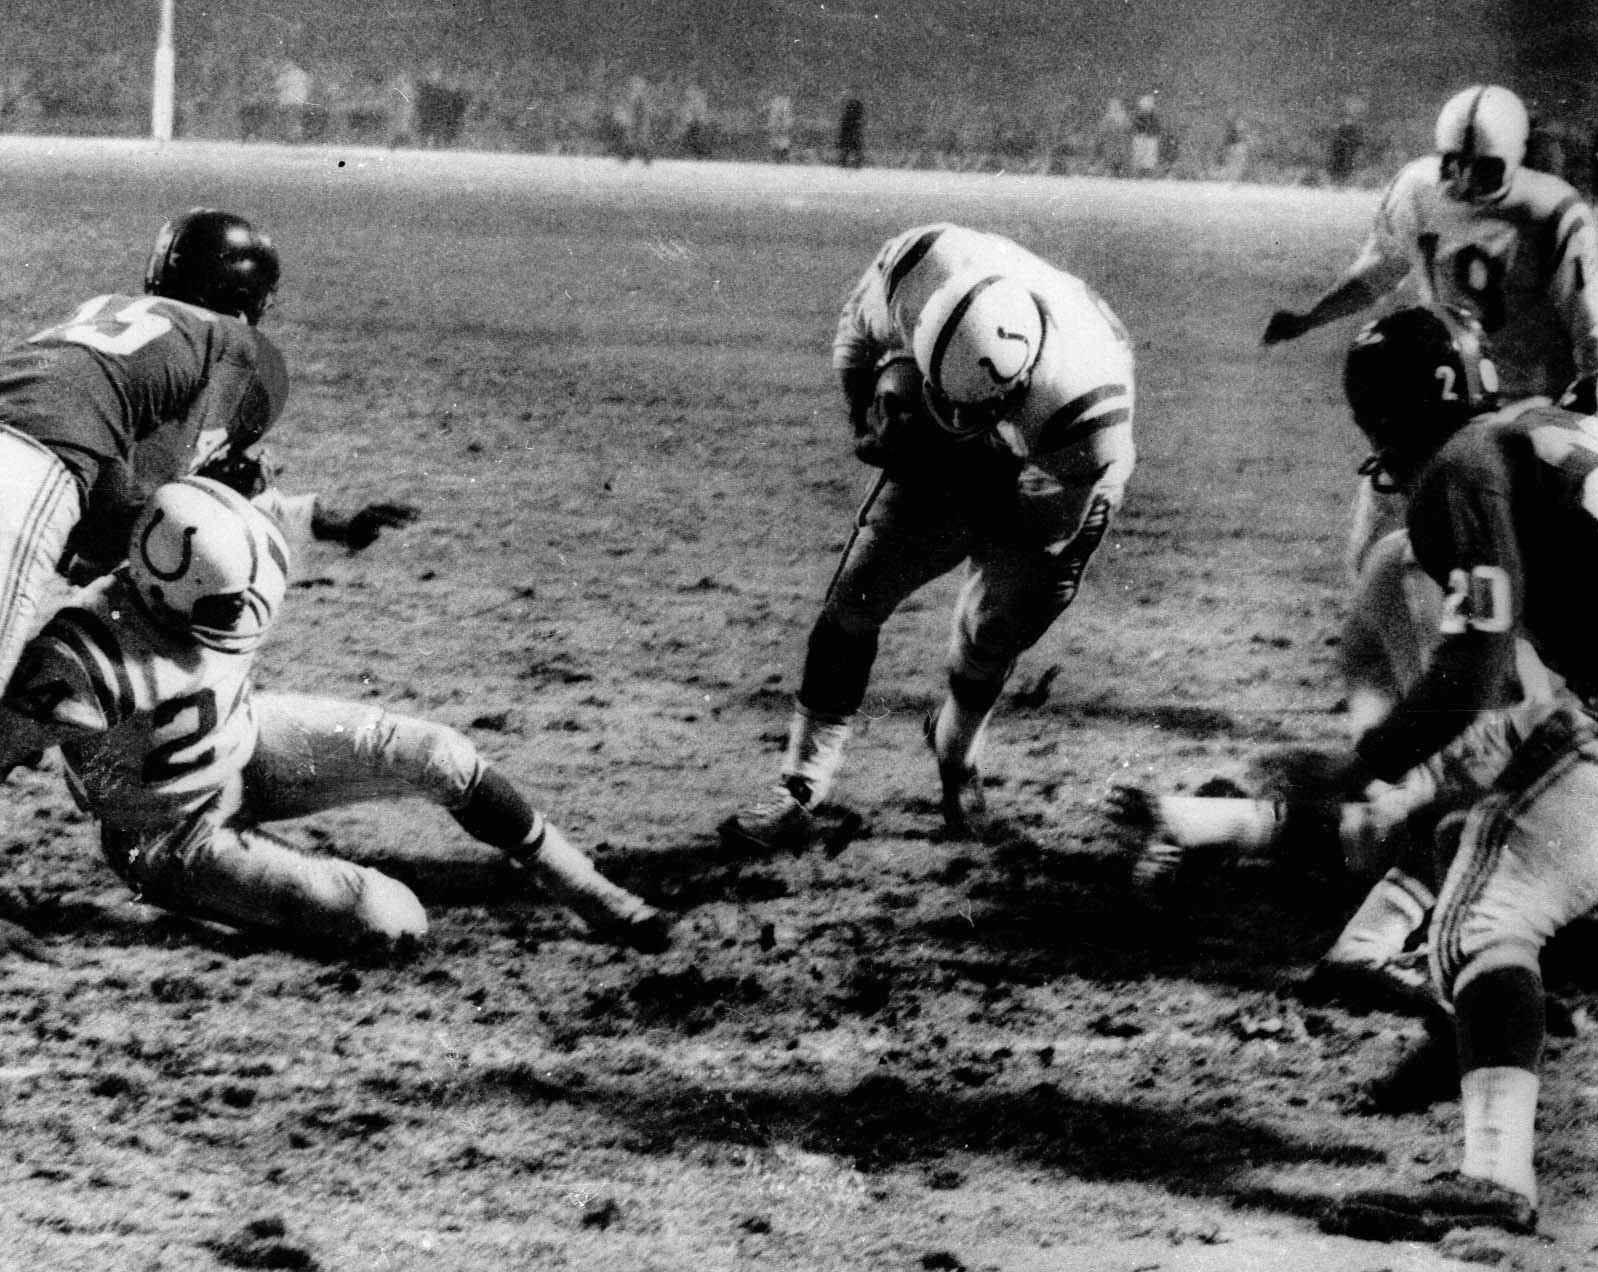 NFL 100: 'The Greatest Game Ever Played 